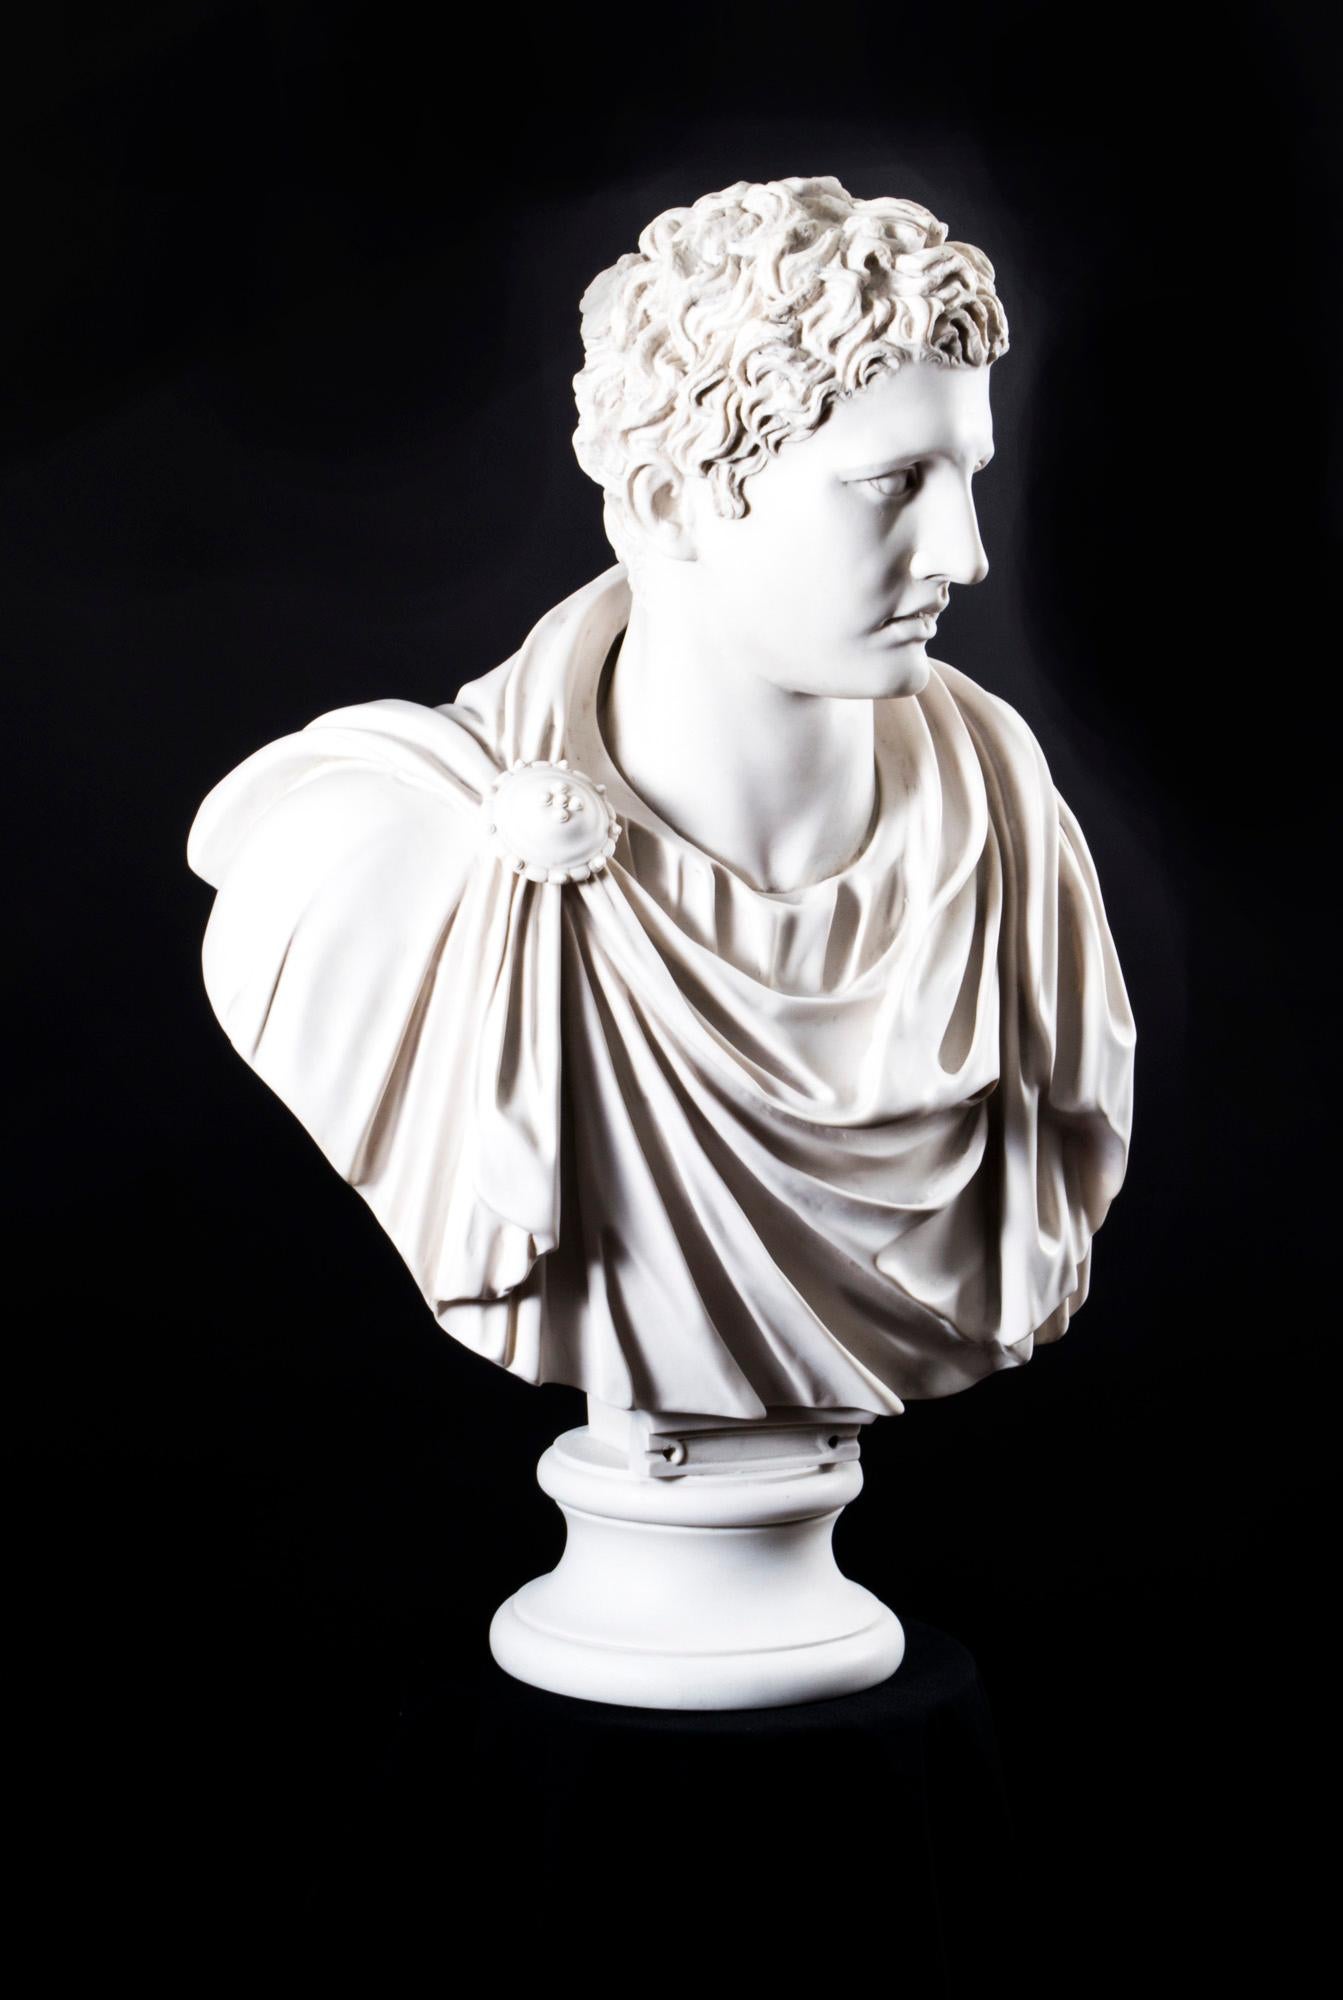 A beautifully sculpted marble bust of the famous Roman politician and general Marc Antony.

The attention to detail throughout the piece is second to none and the figure is extremely lifelike.

This high quality bust is made from marble dust or